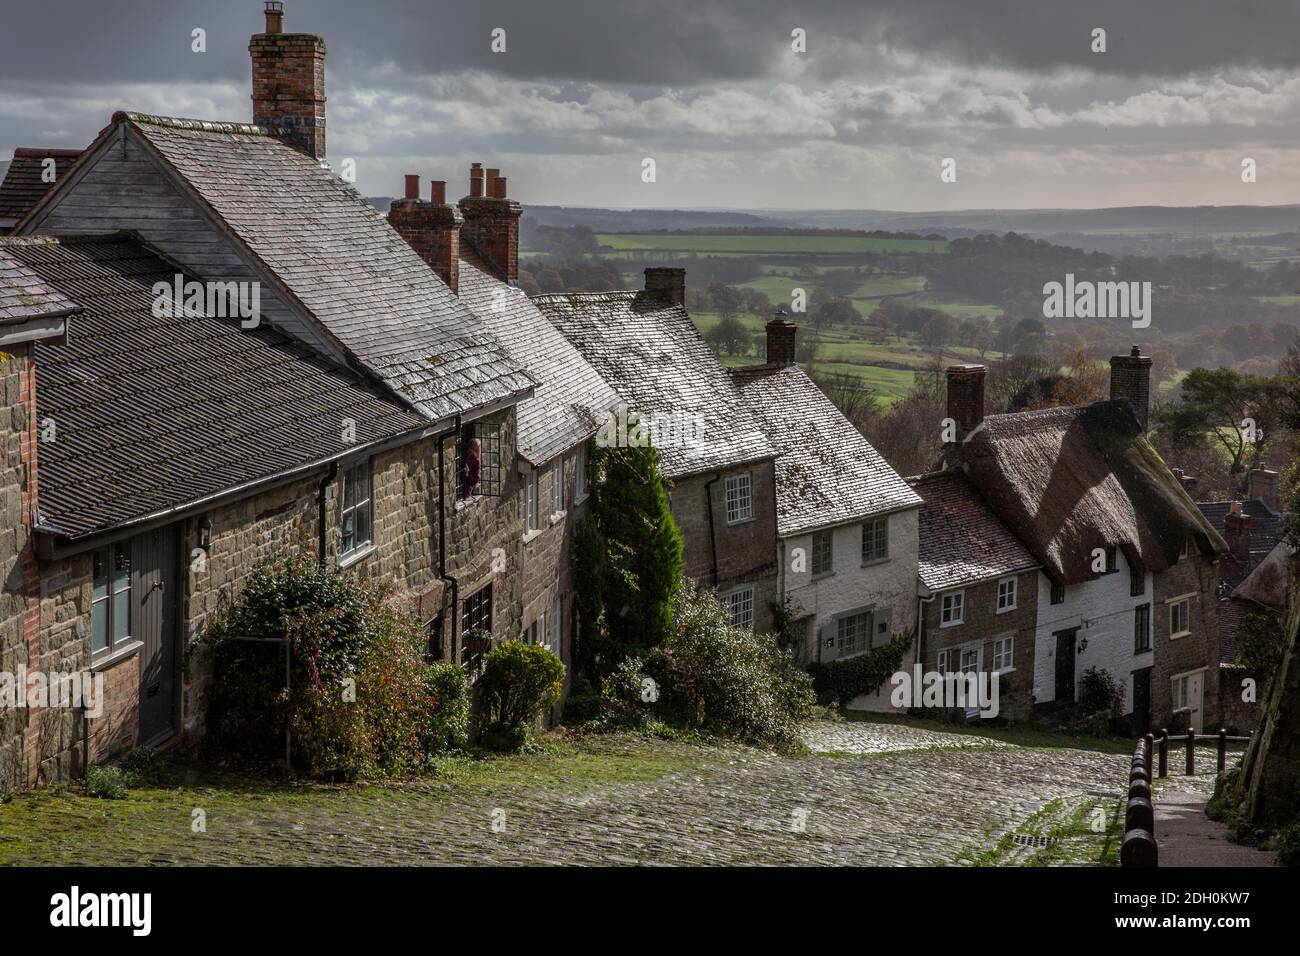 Gold Hill, steep cobbled street in the town of Shaftesbury, Dorset, England, UK. Often described as 'one of the most romantic sights in England.' Stock Photo